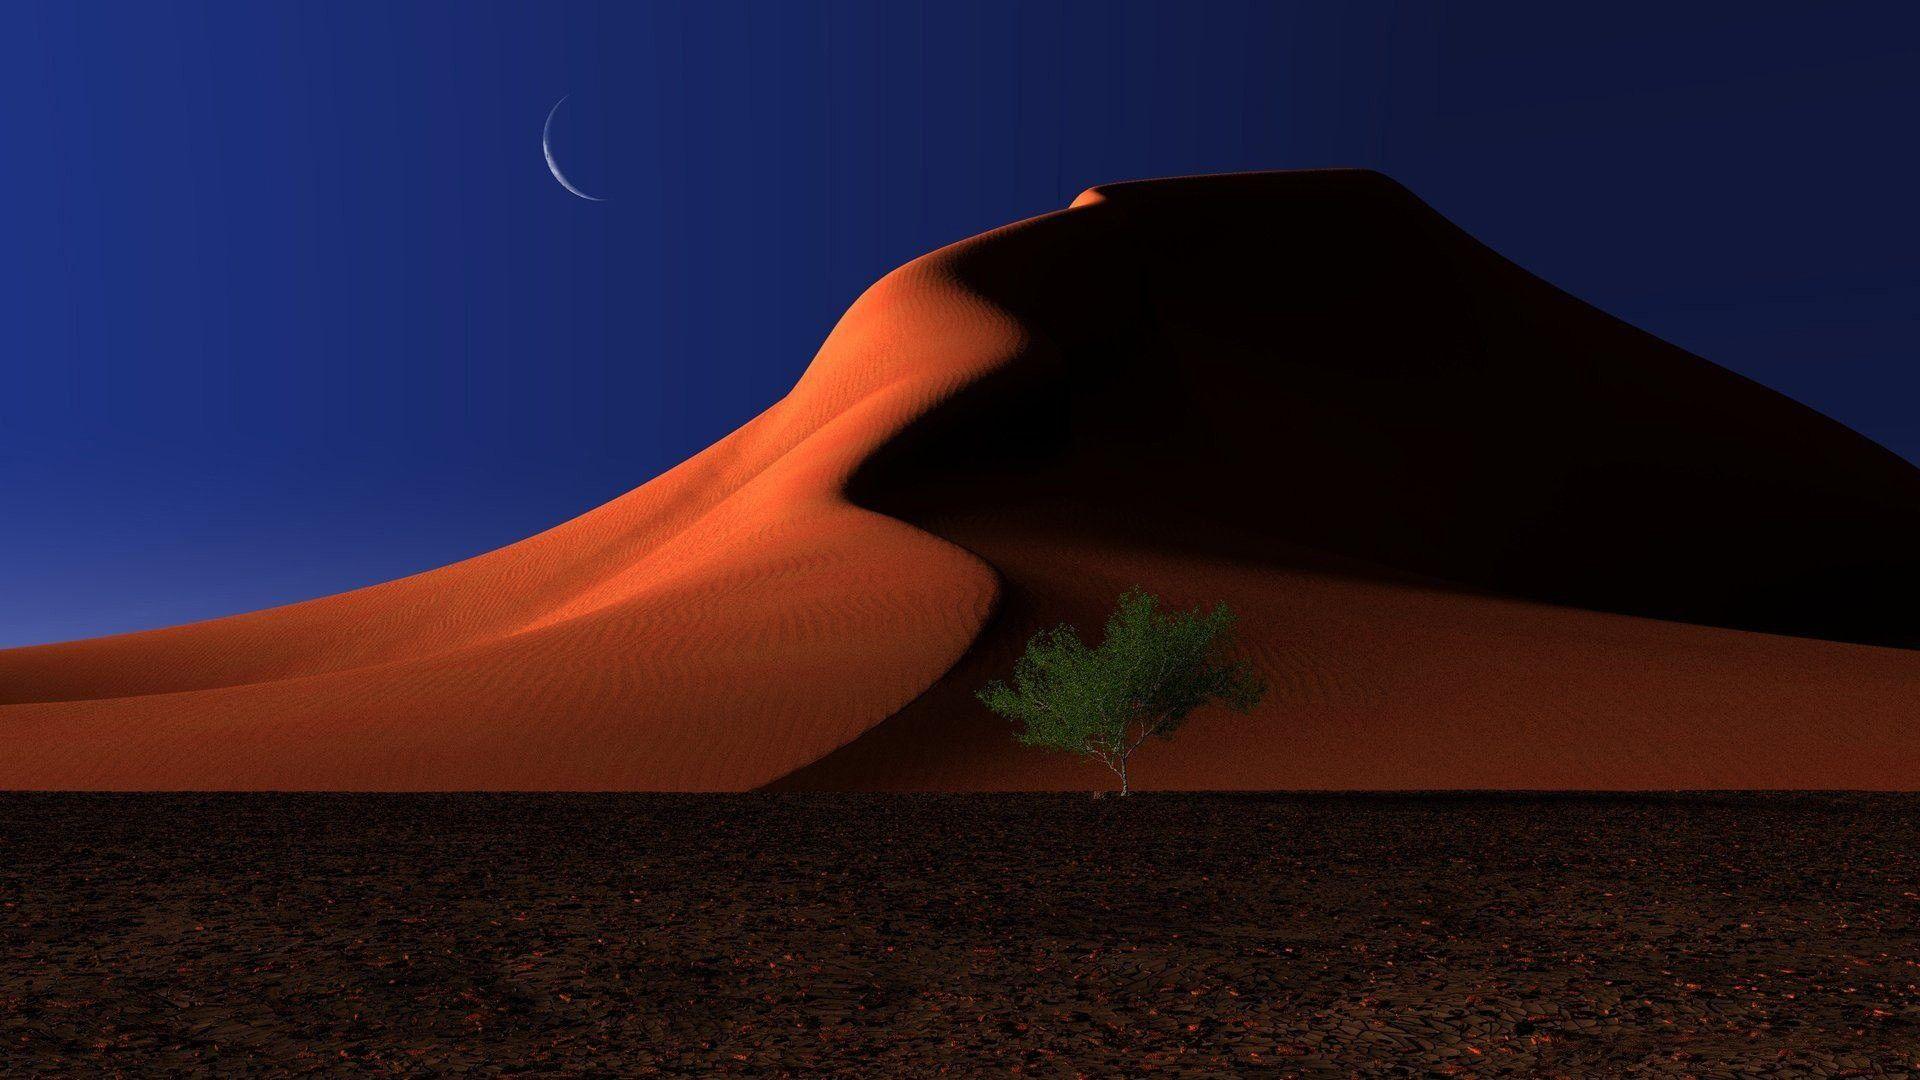 Landscape With A Red Sand Dune African Acacia Tree And Desert